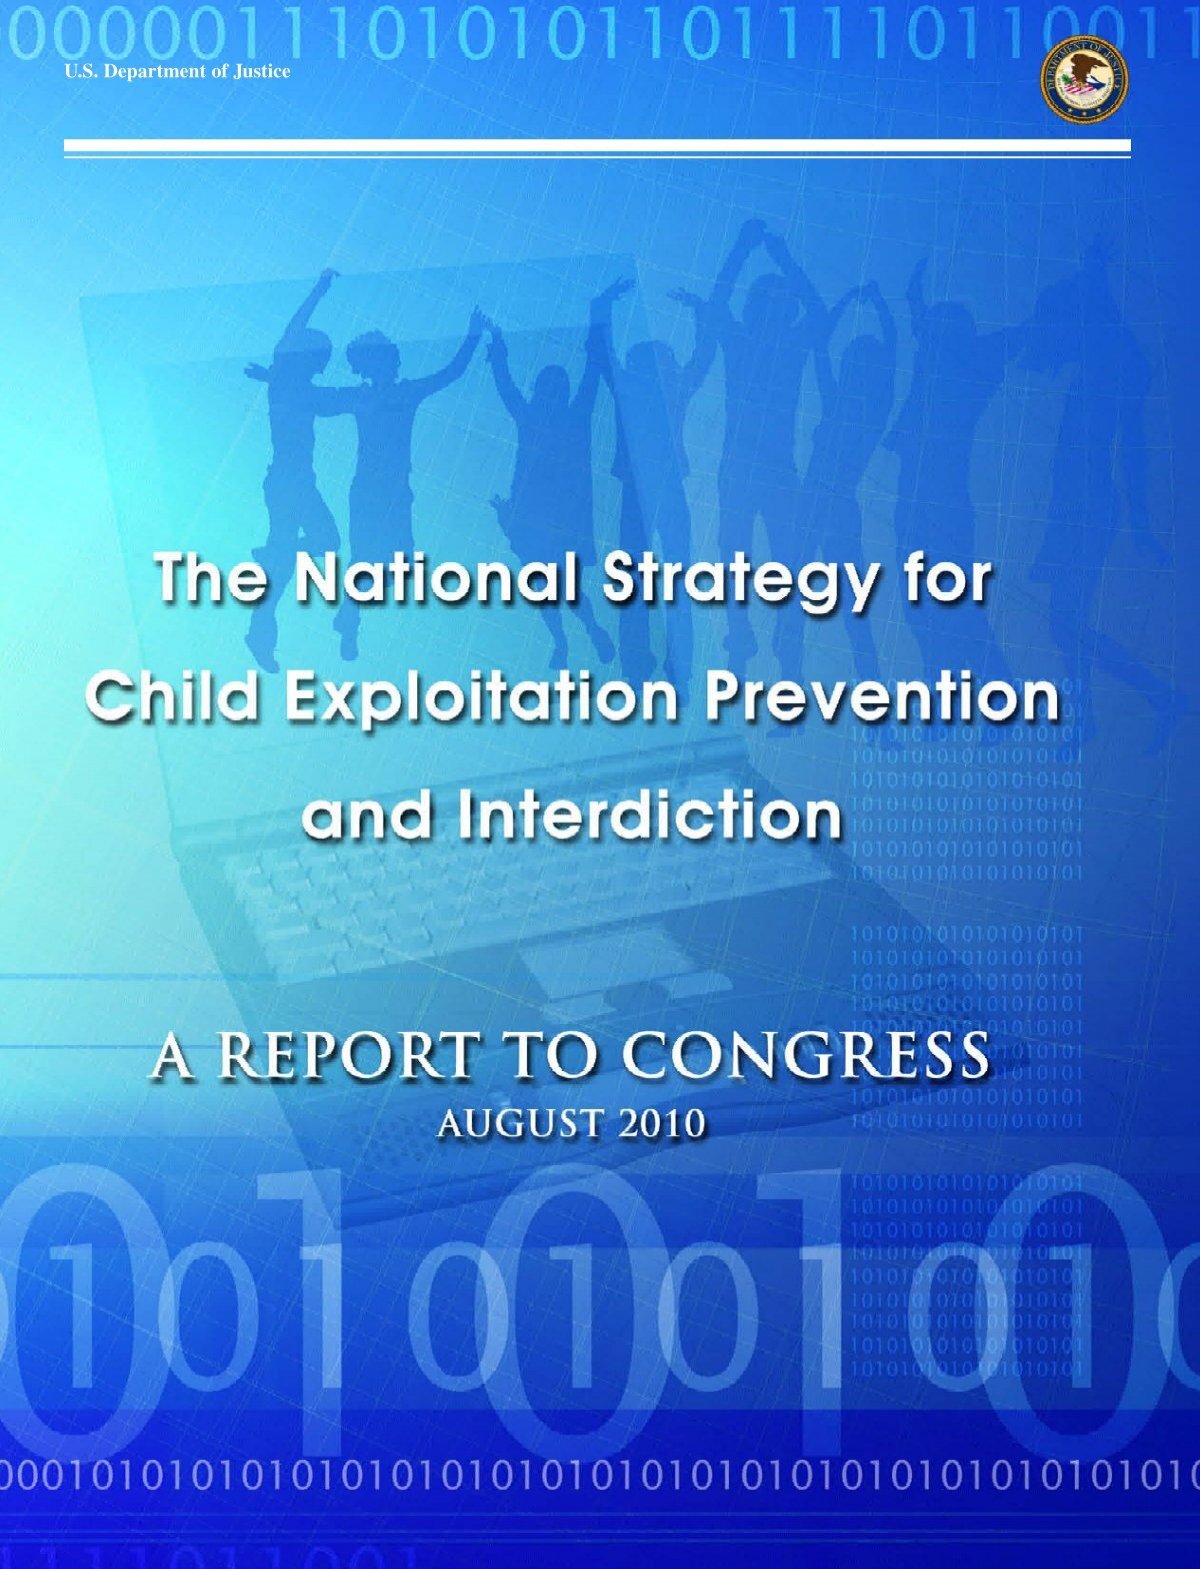 The National Strategy for Child Exploitation Prevention and Interdiction